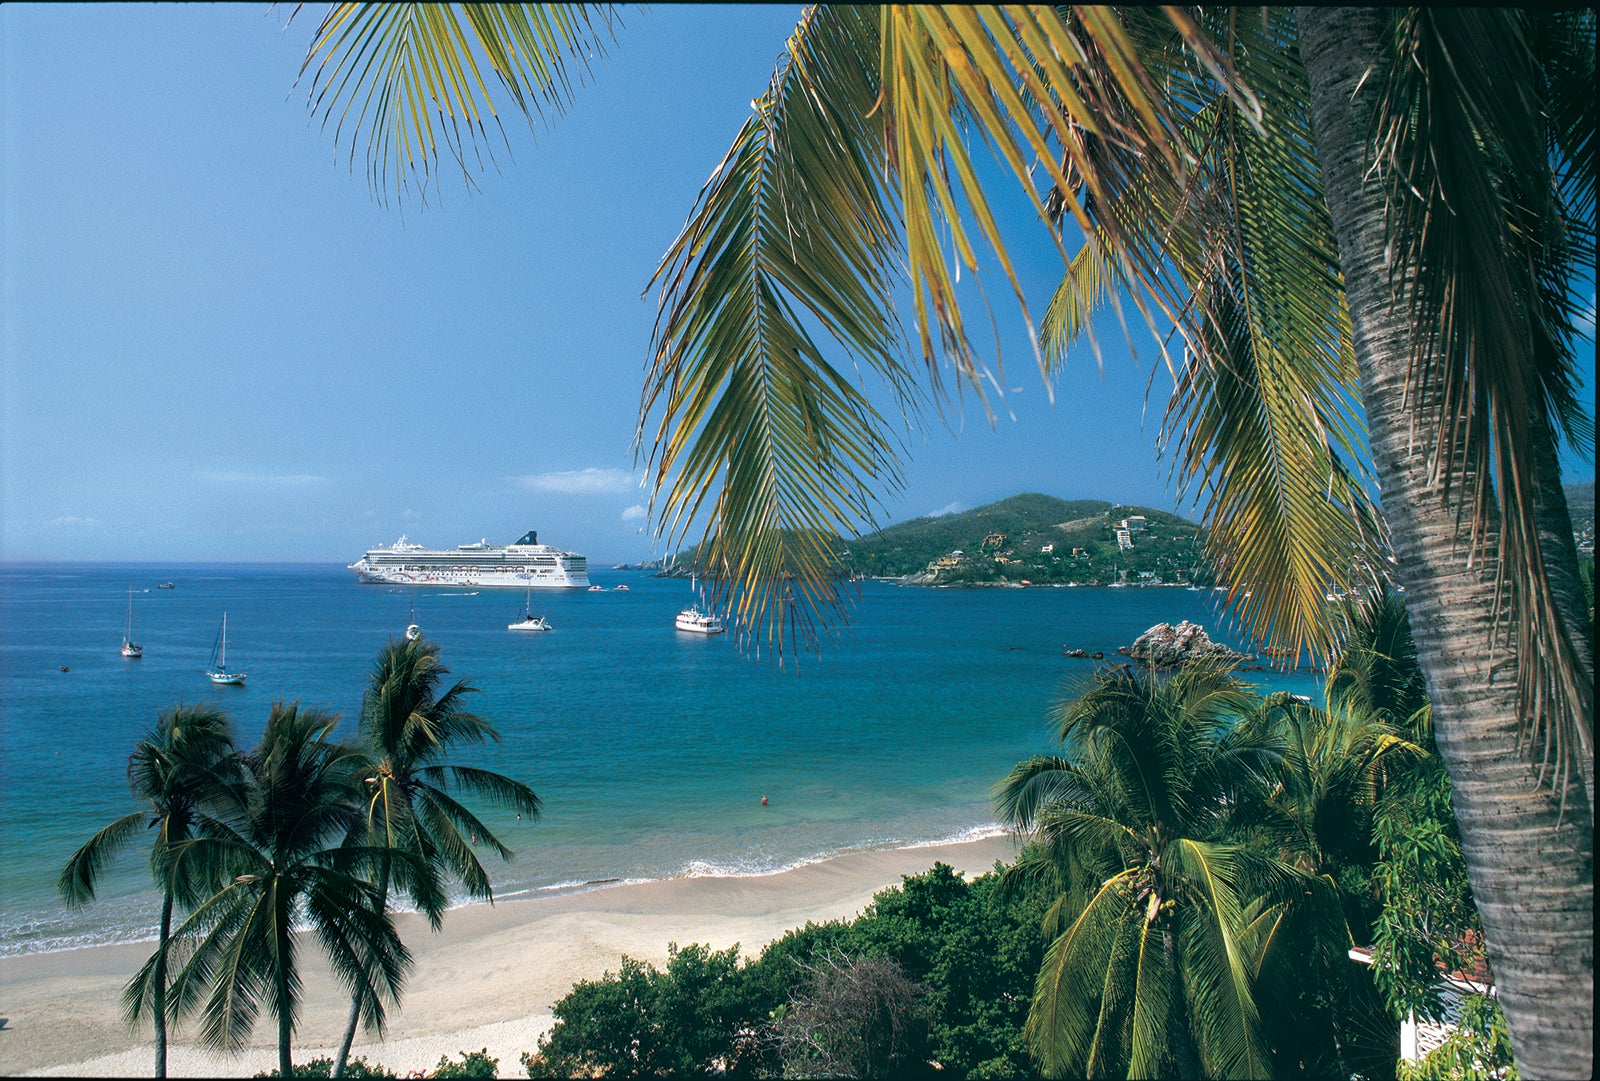 Norwegian Star cruise ship anchored off the sandy beaches and palm trees of Zihuatanejo, Mexico